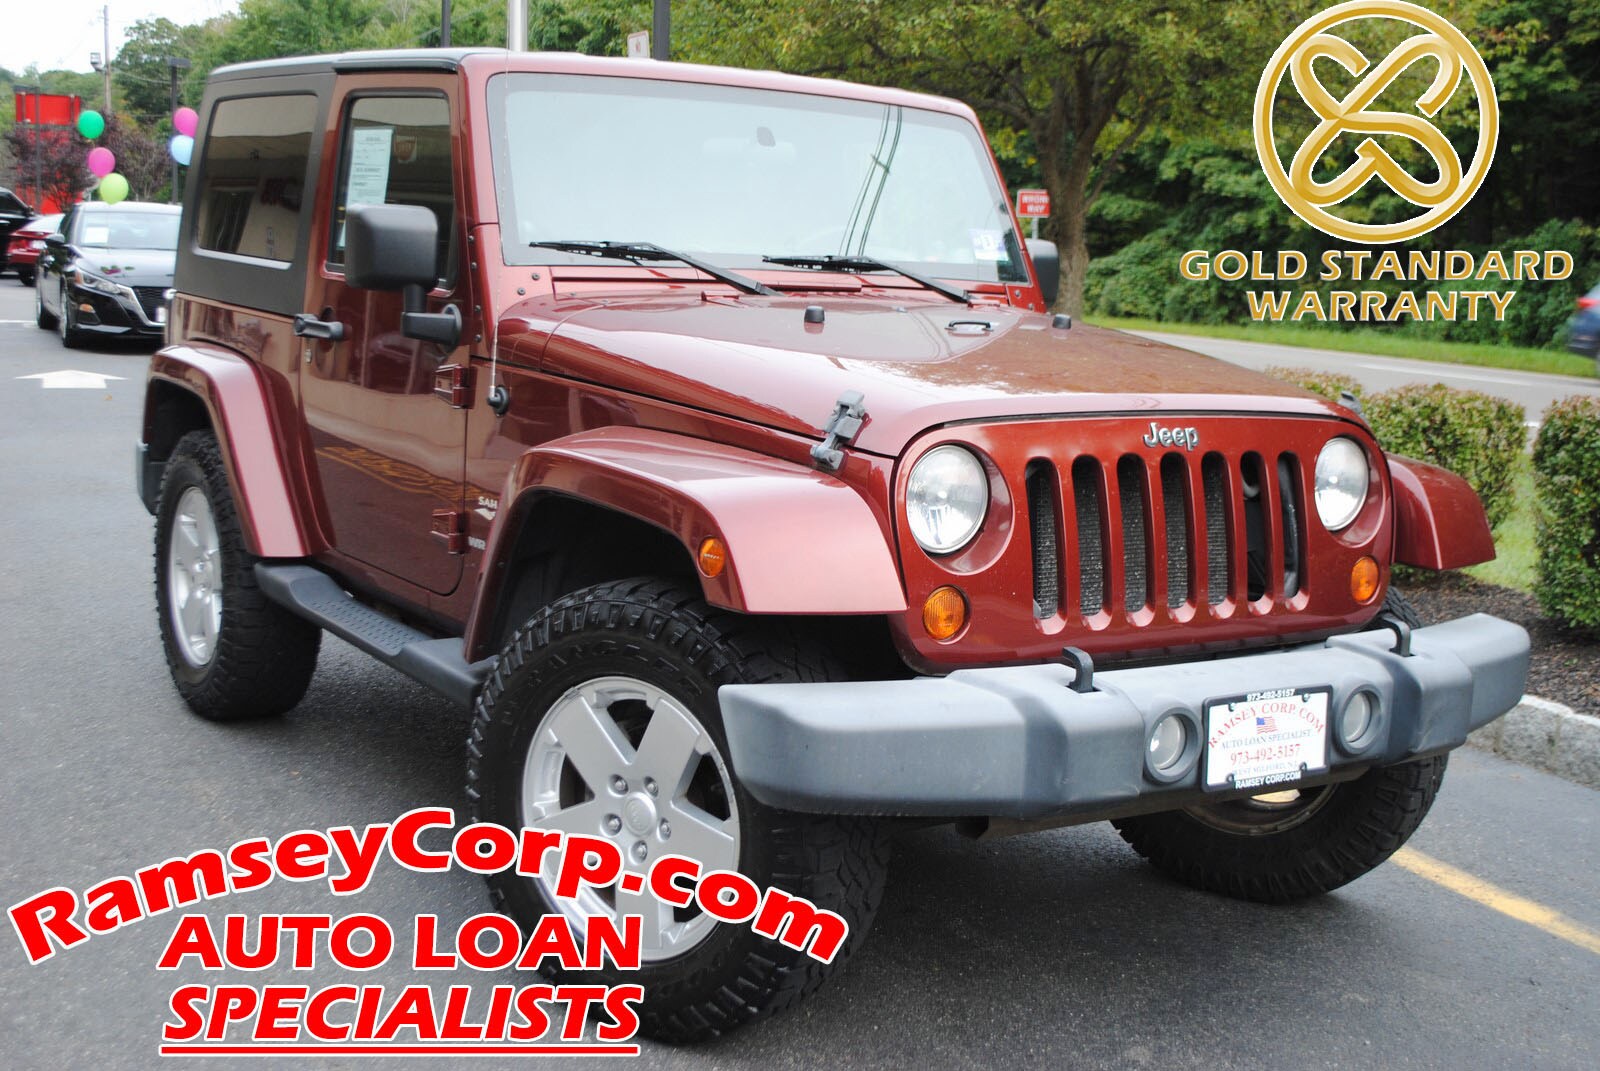 Used 2007 Jeep Wrangler For Sale at Ramsey Corp. | VIN: 1J4FA54137L183680